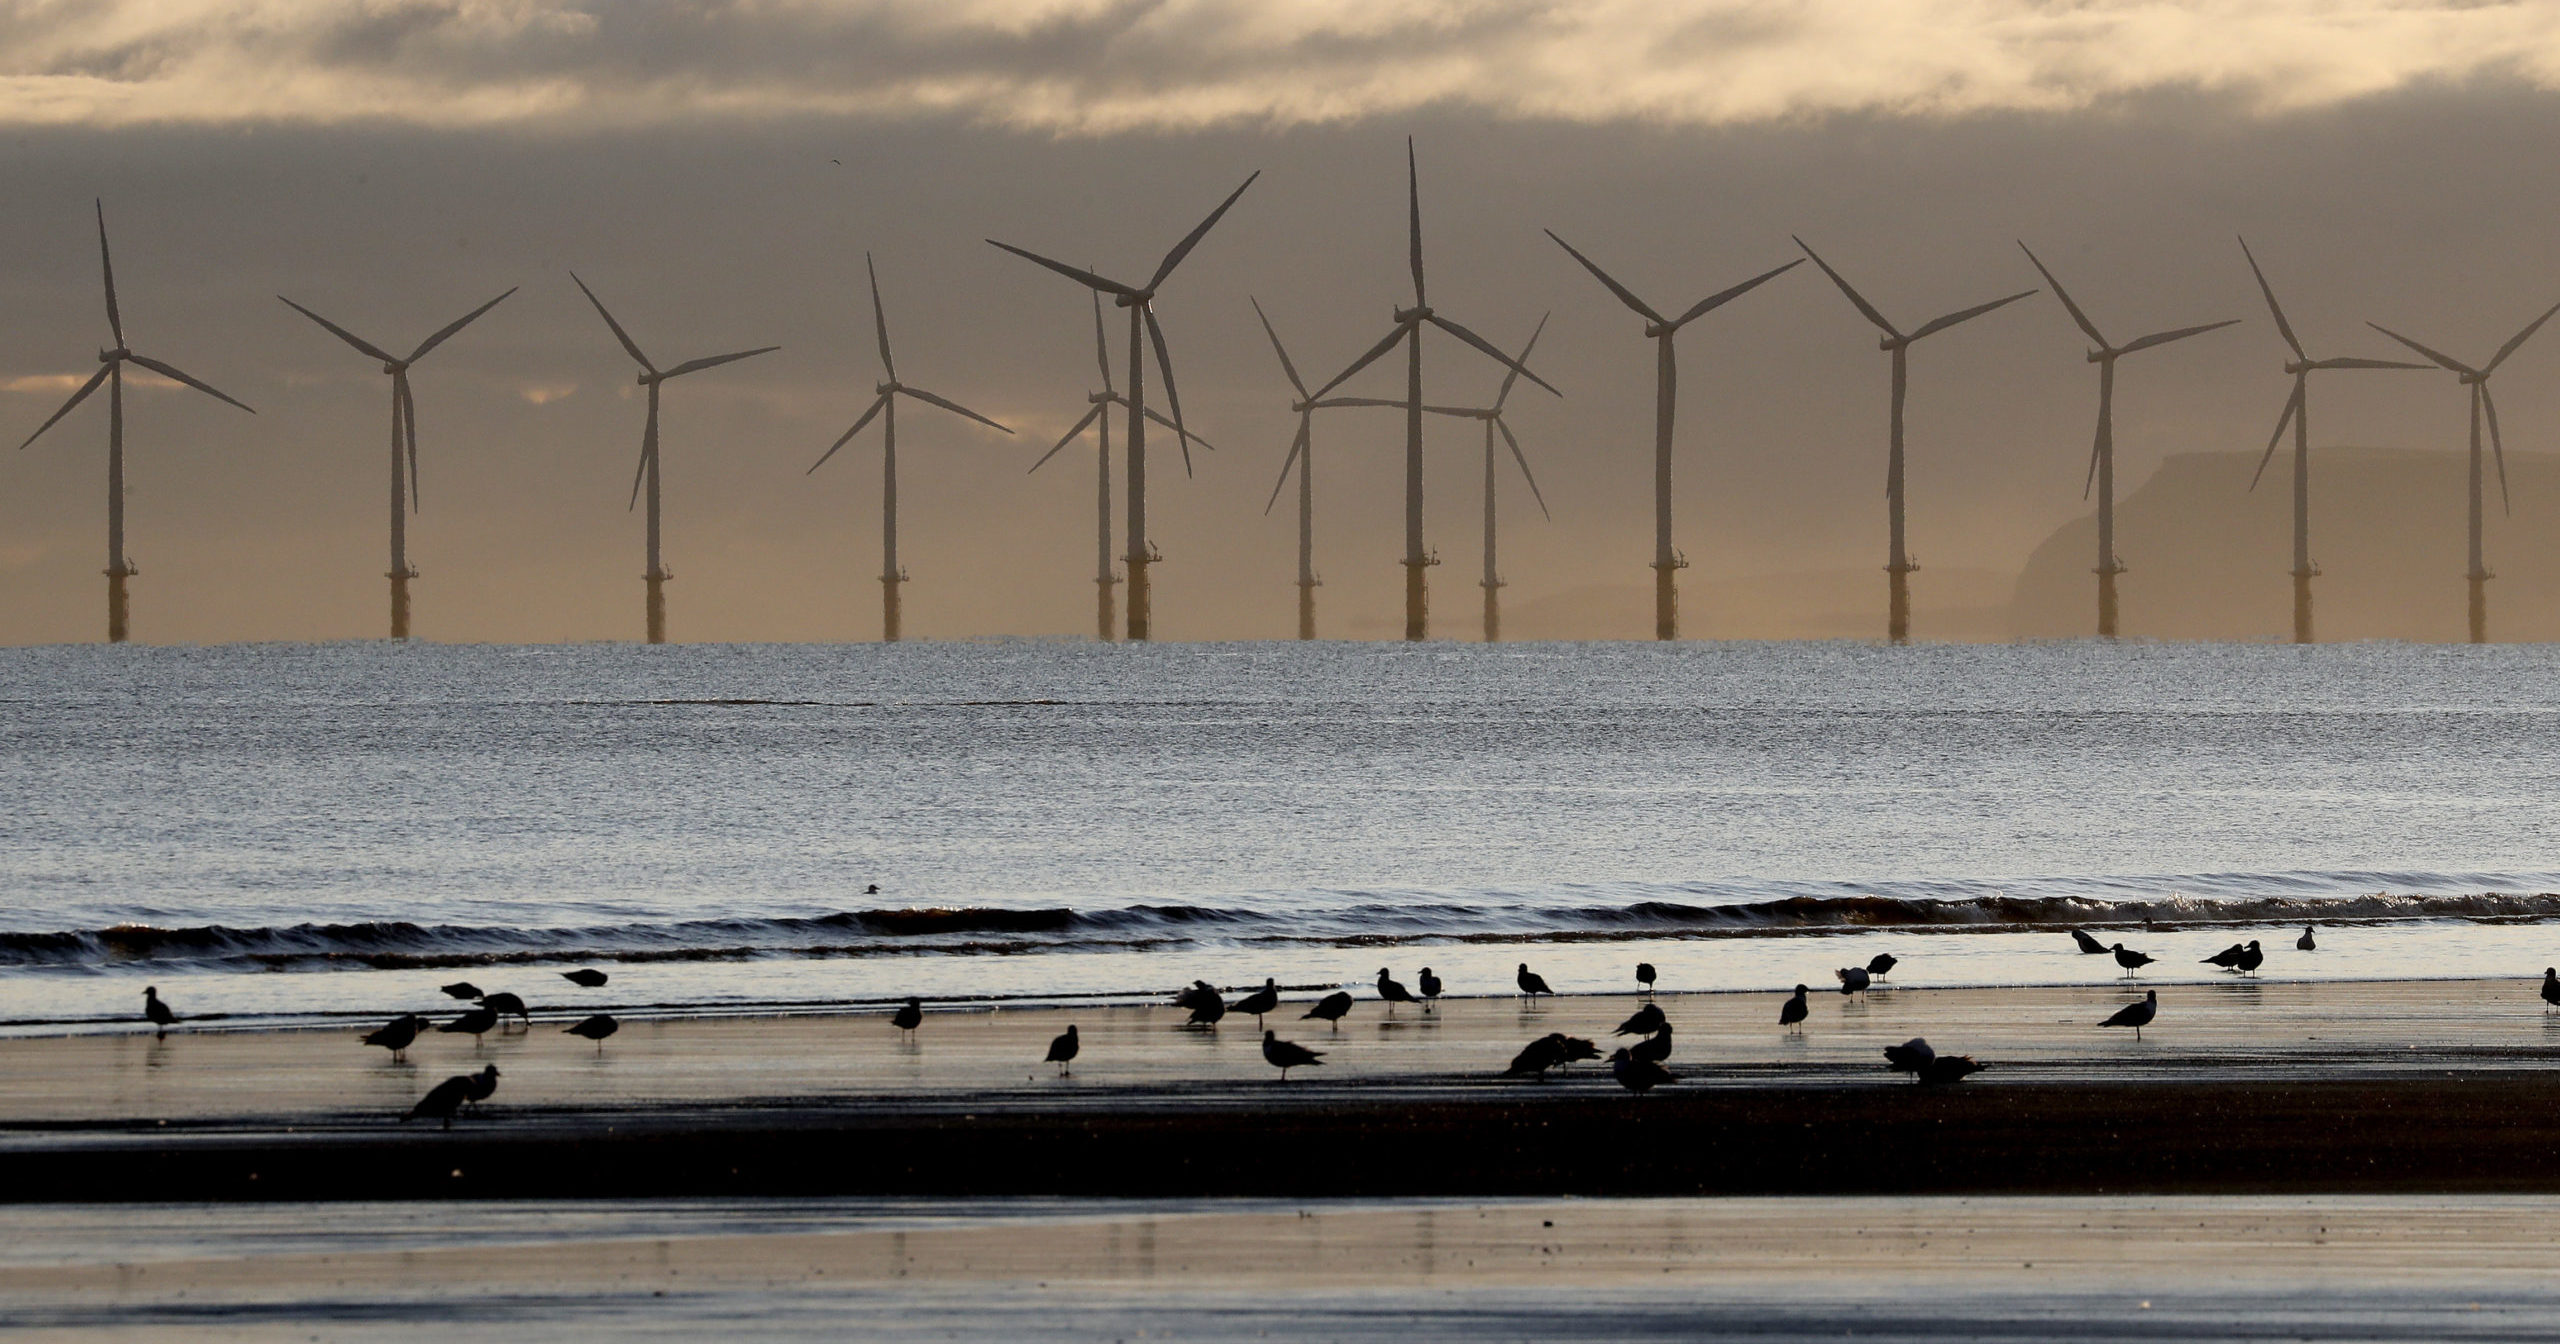 An offshore wind farm is visible from the beach in Hartlepool, England, on Nov. 12, 2019.